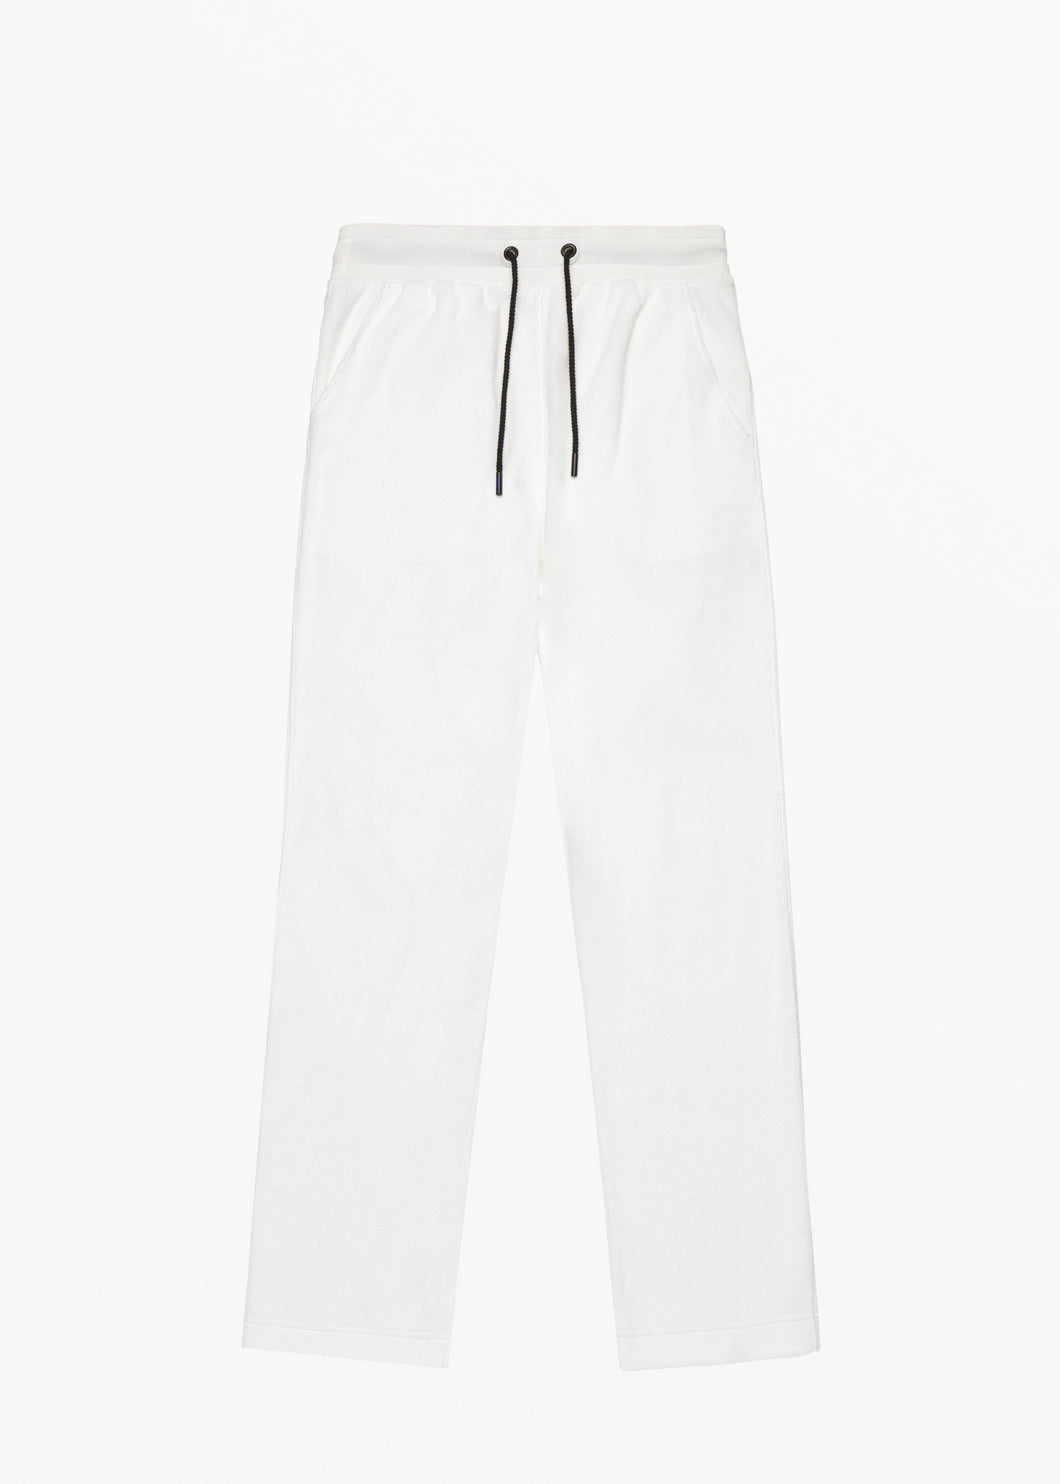 Kiton knitted trousers, made of cotton